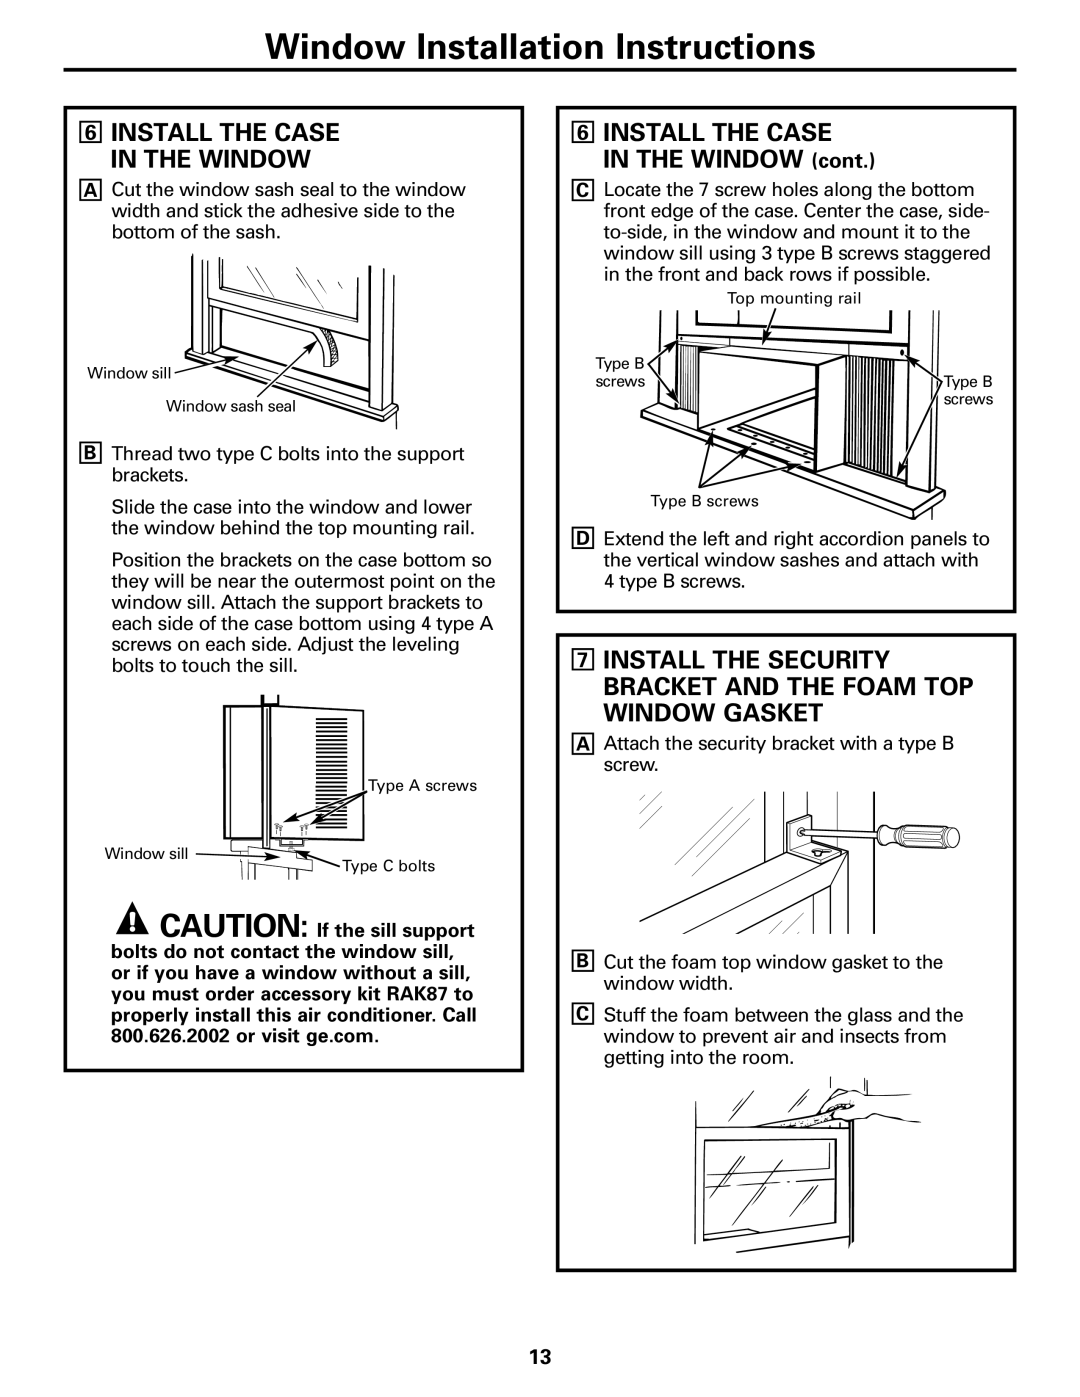 GE ASM10*, ASV10, ASM08*, ASQ12, ASQ10, ASQ14 6INSTALL THE CASE IN THE WINDOW cont, Window Installation Instructions 